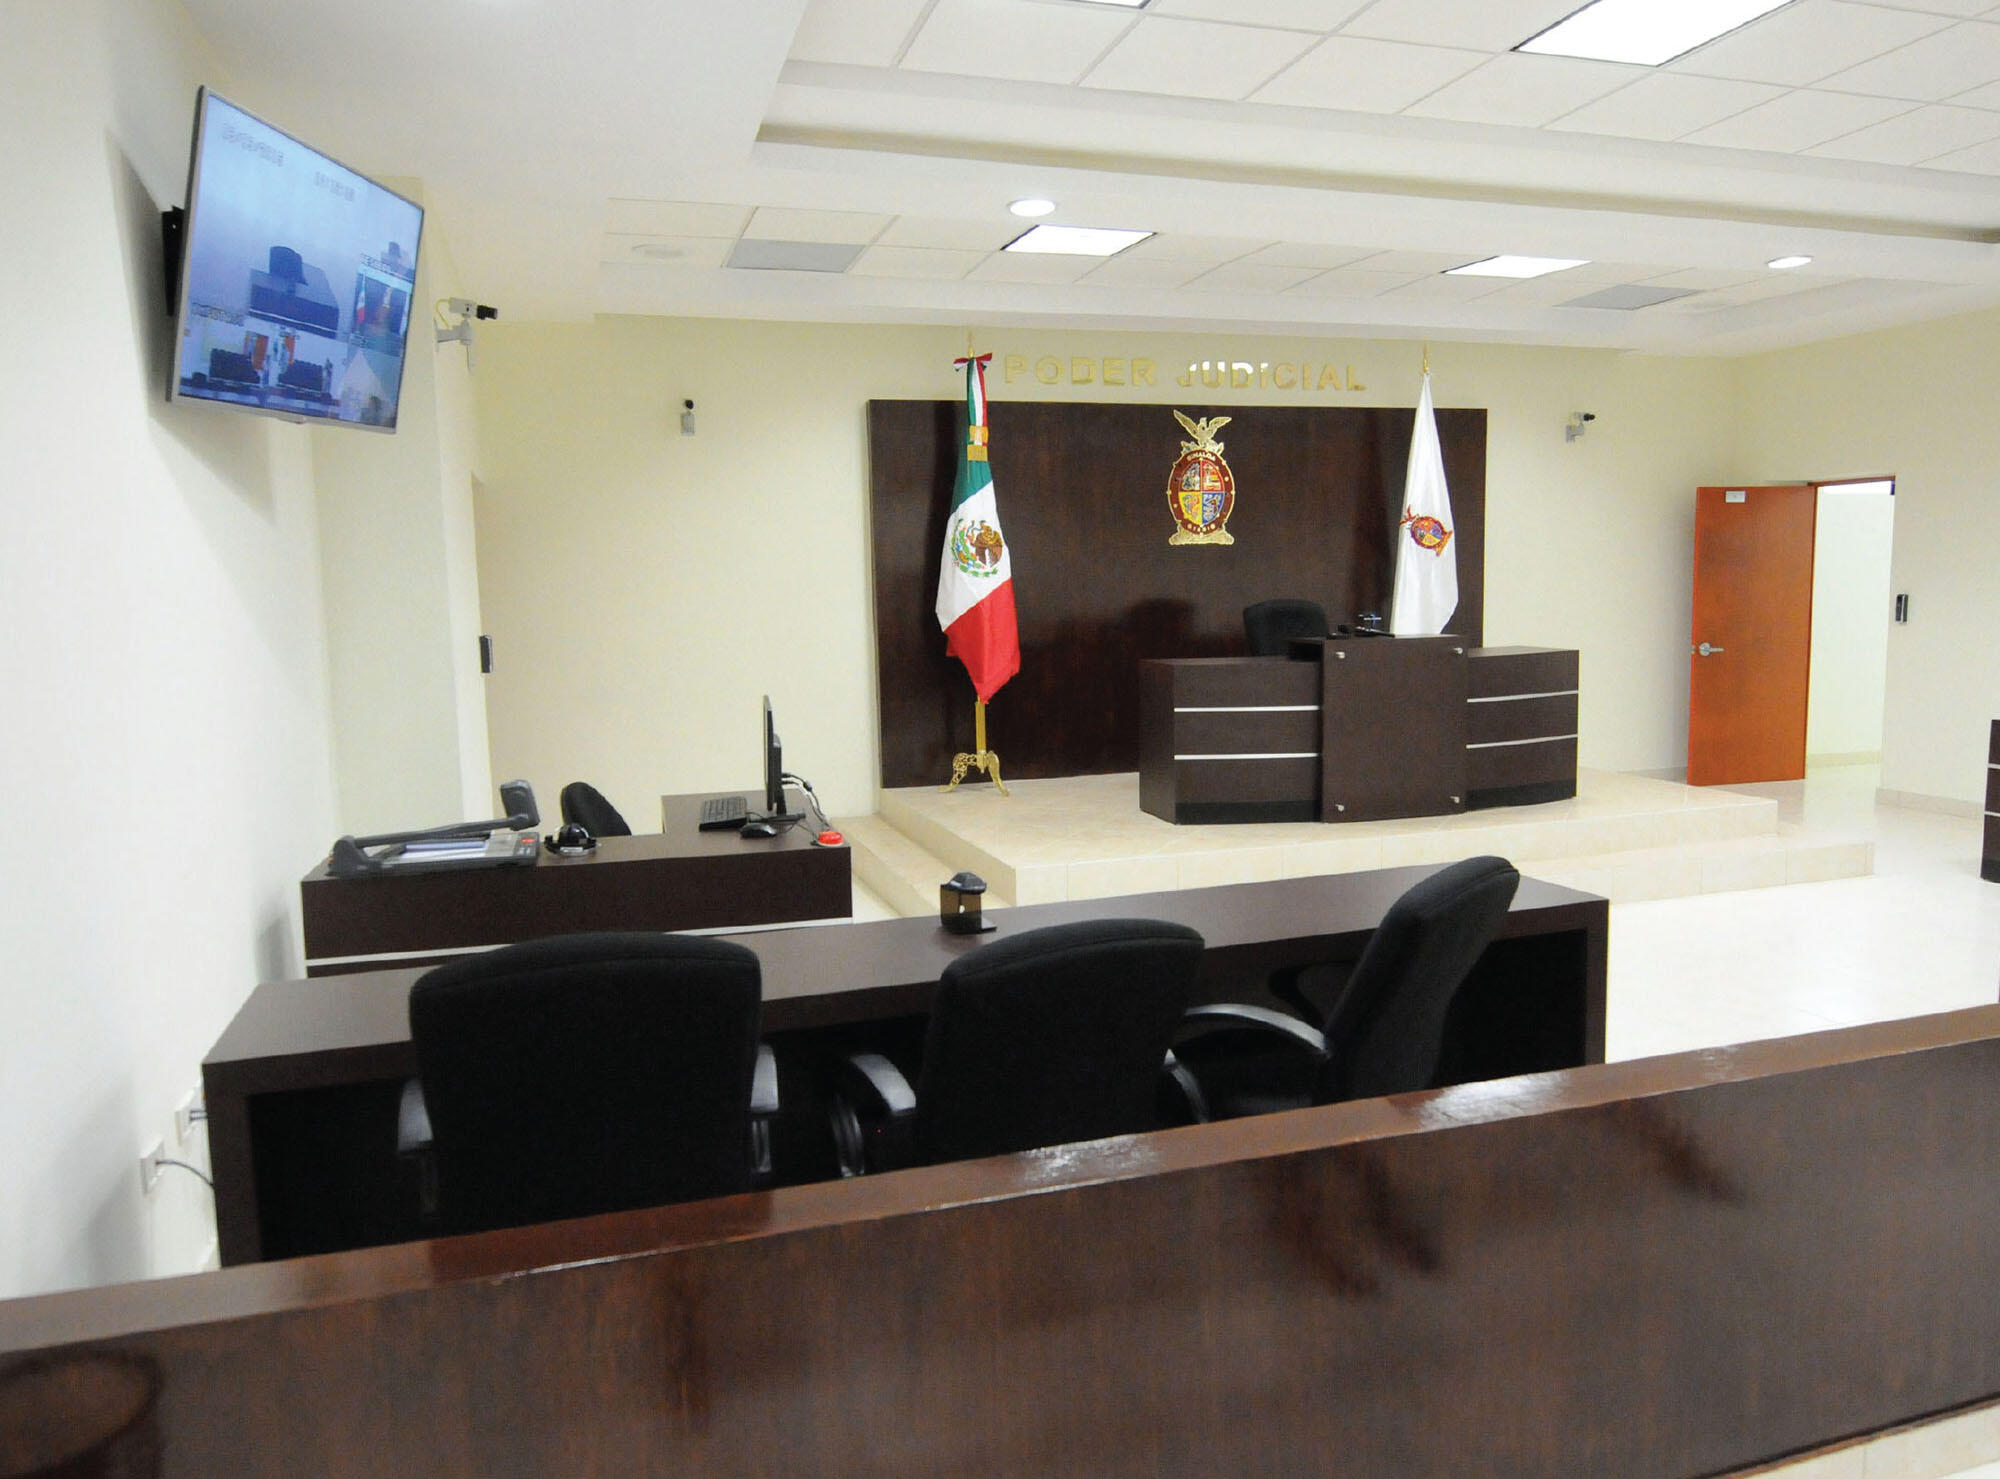 A bright, airy, and open new courtroom in Sinaloa. (Photo by malova gobernador.)